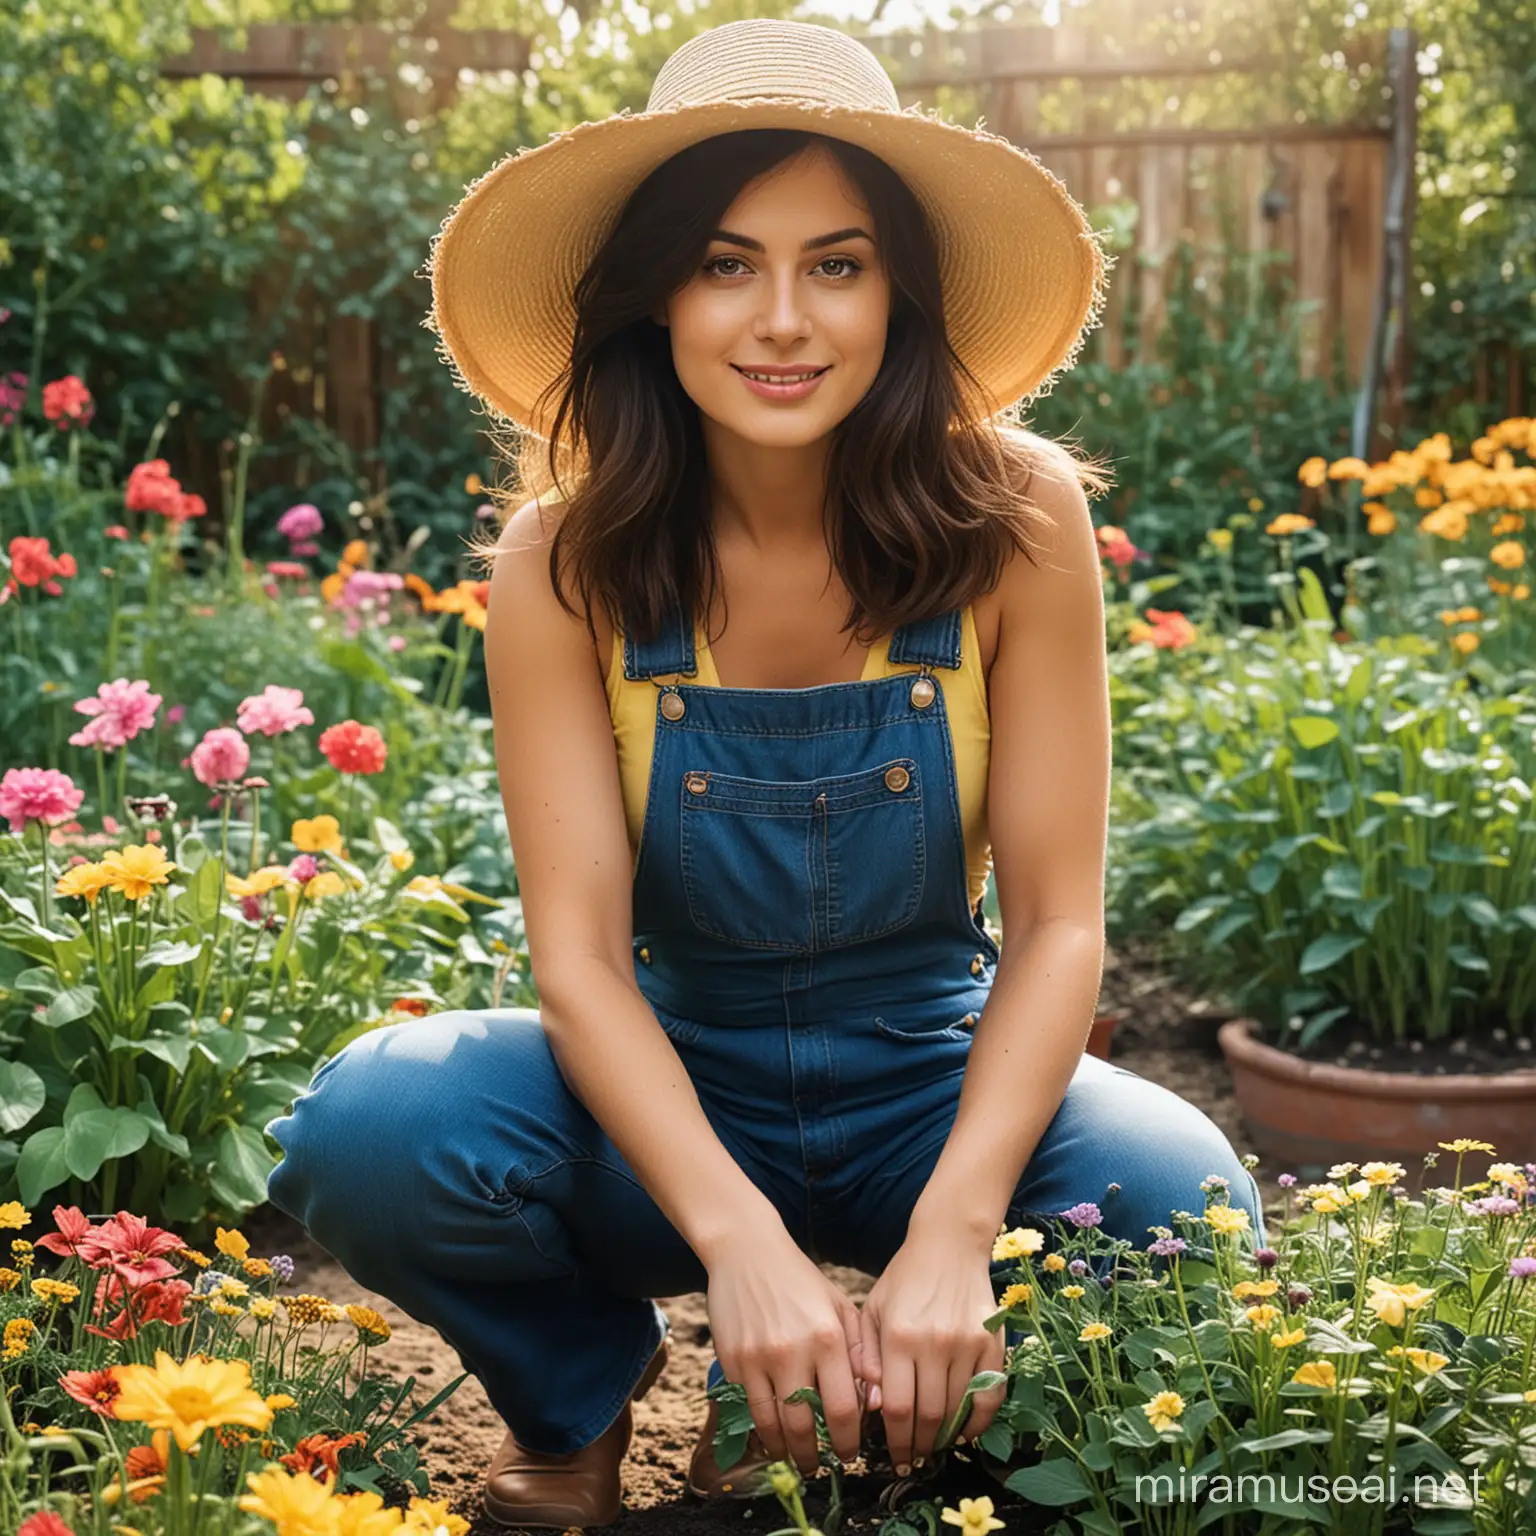 Milana tends to her garden at home, wearing overalls and a wide-brimmed straw hat, planting flowers in a colorful garden bed. looks hot and sexy